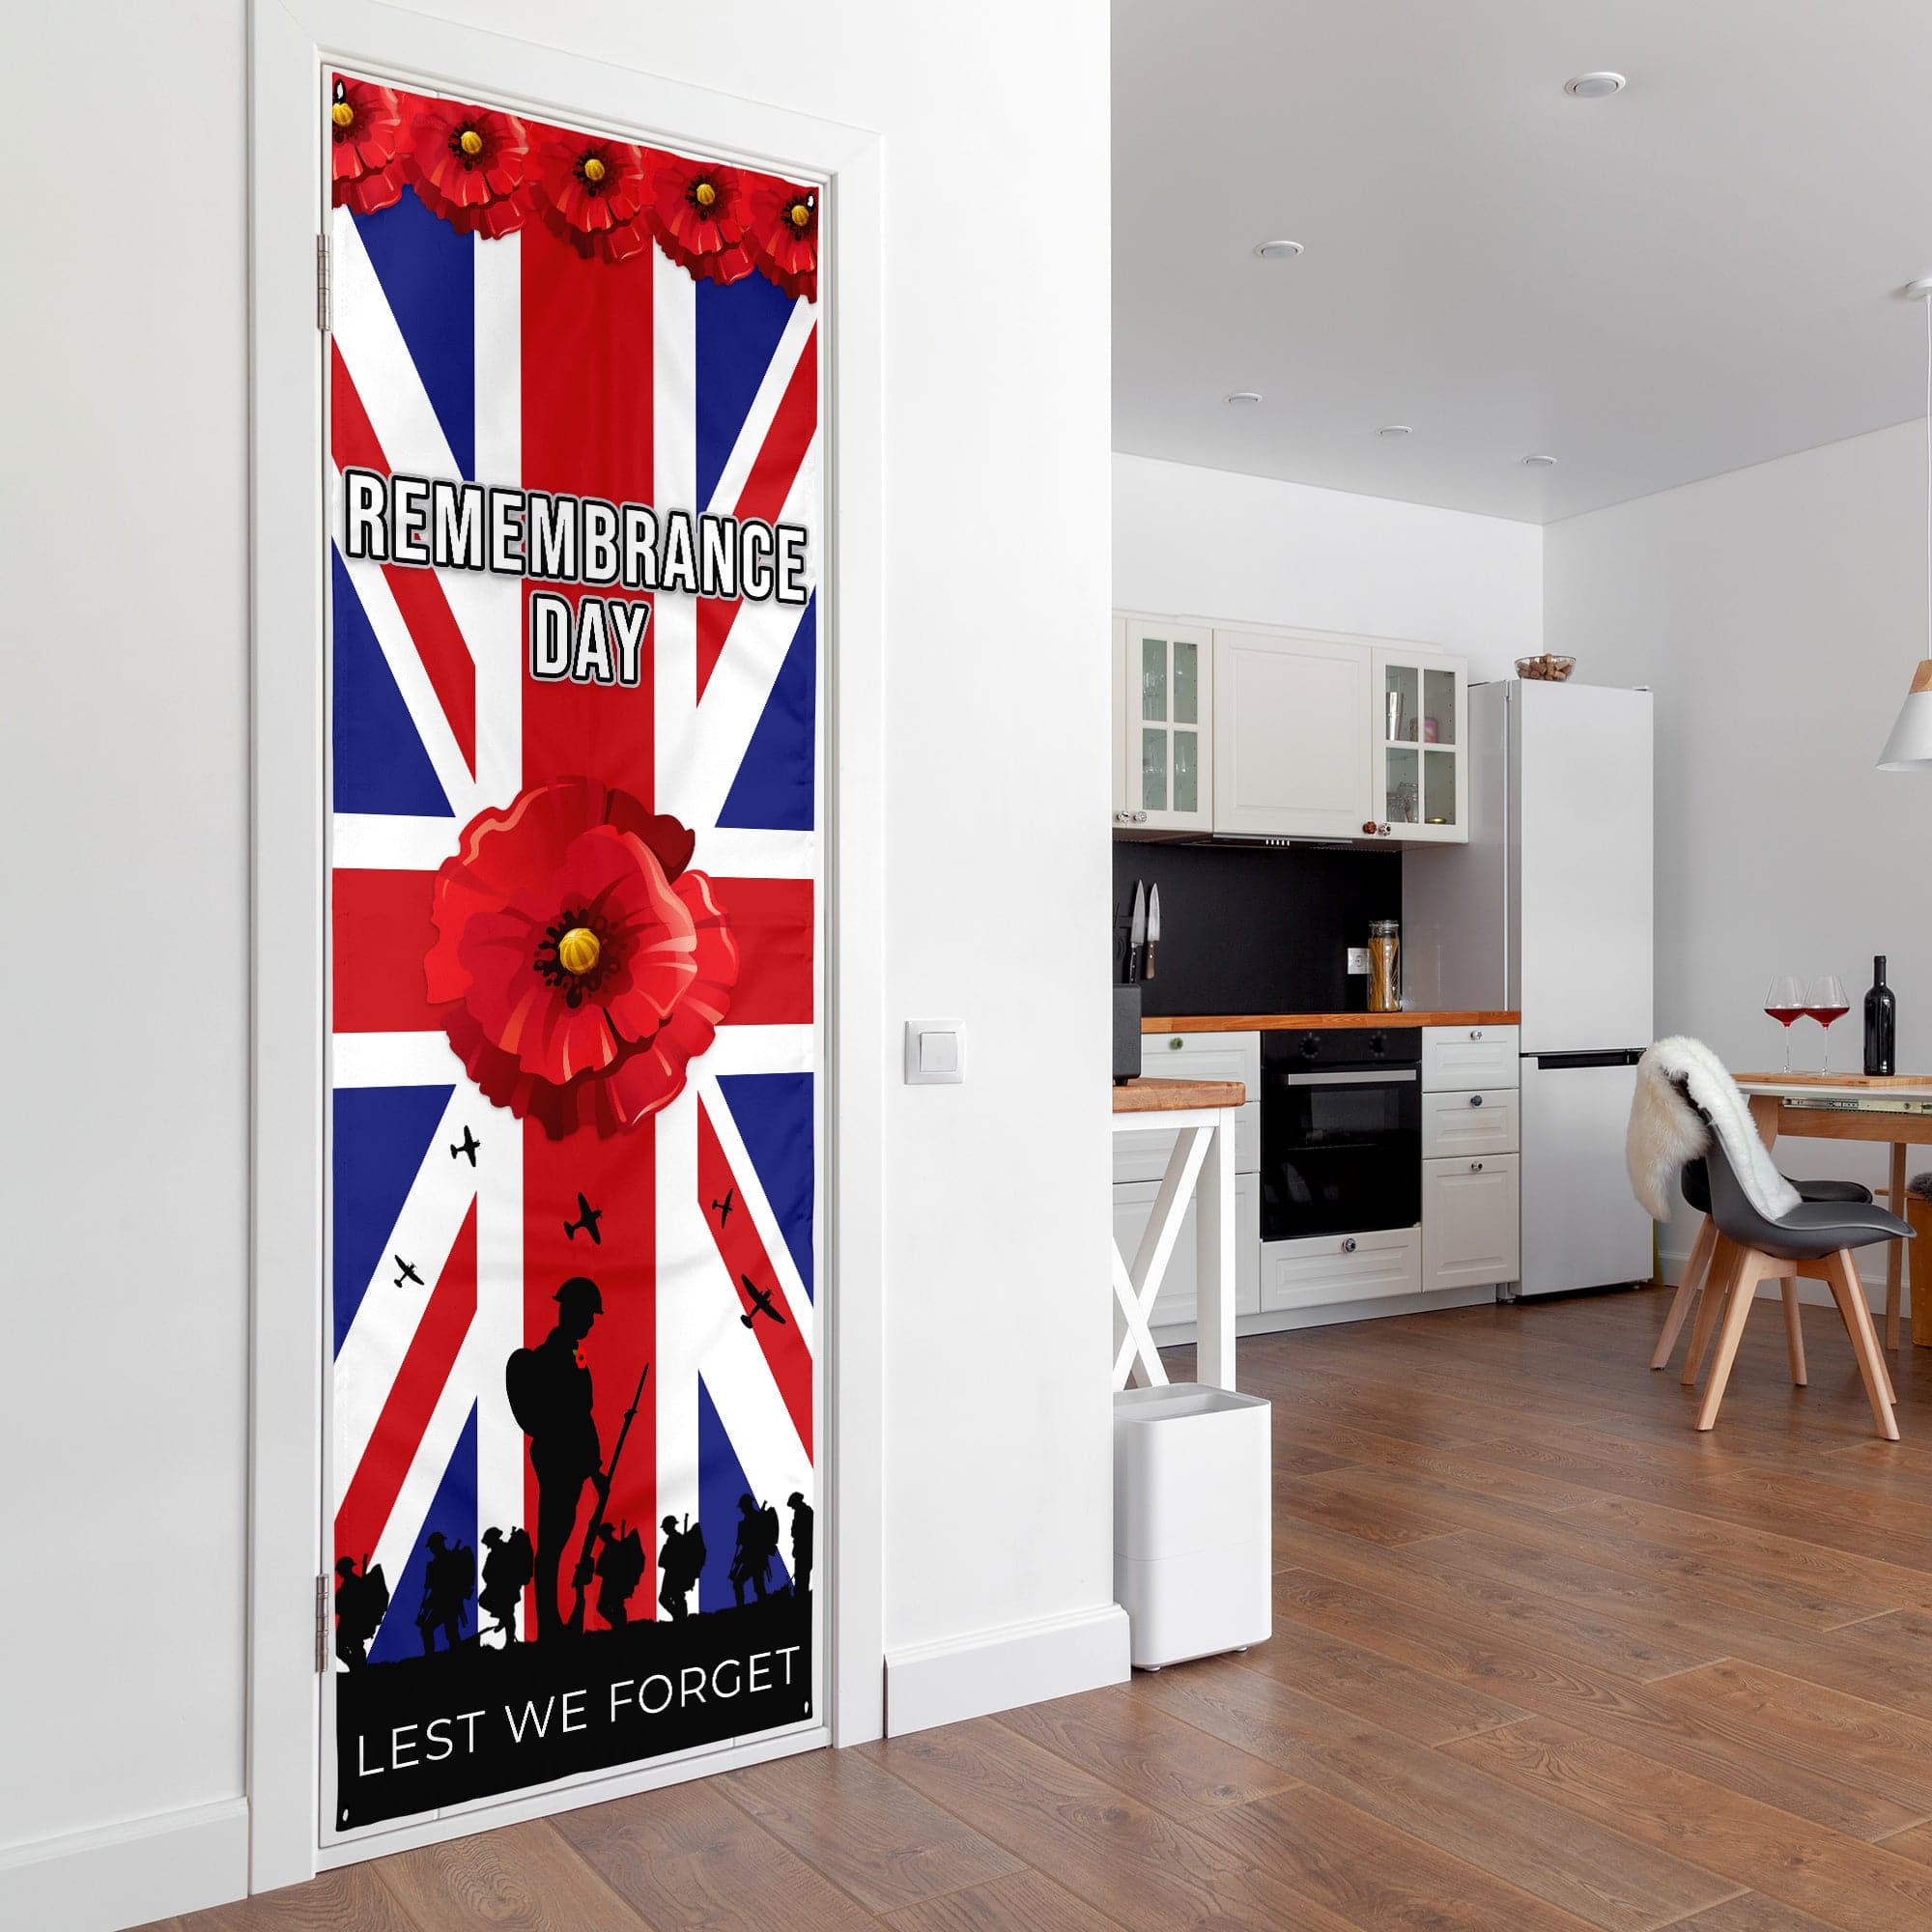 Personalised Text Remembrance Day - Poppy Flag - Door Banner